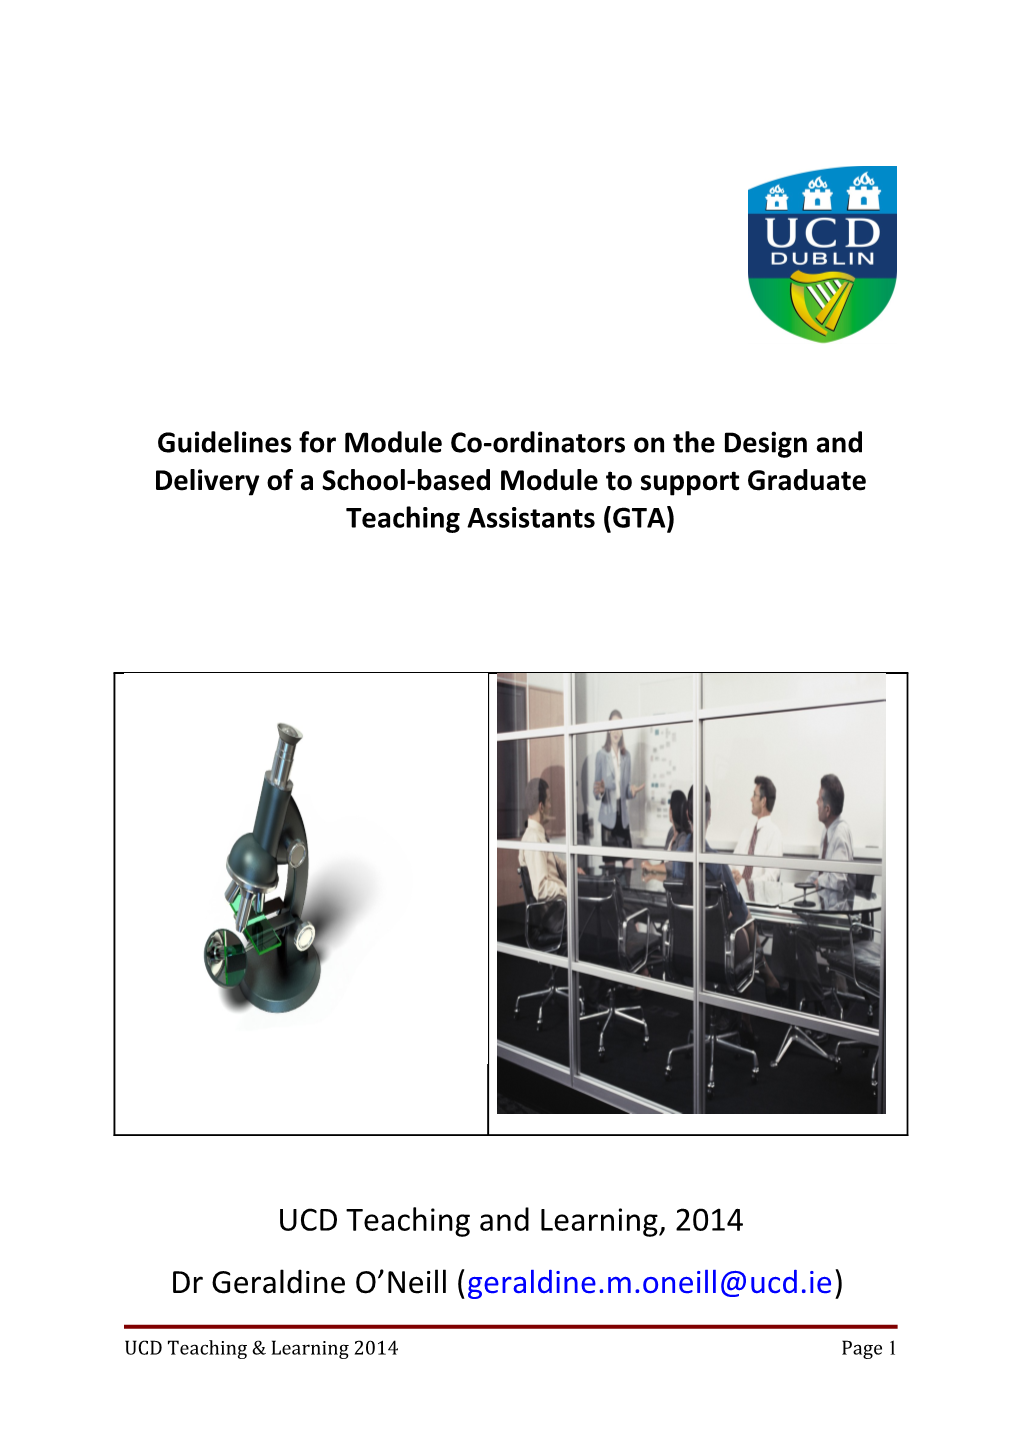 UCD Teaching and Learning